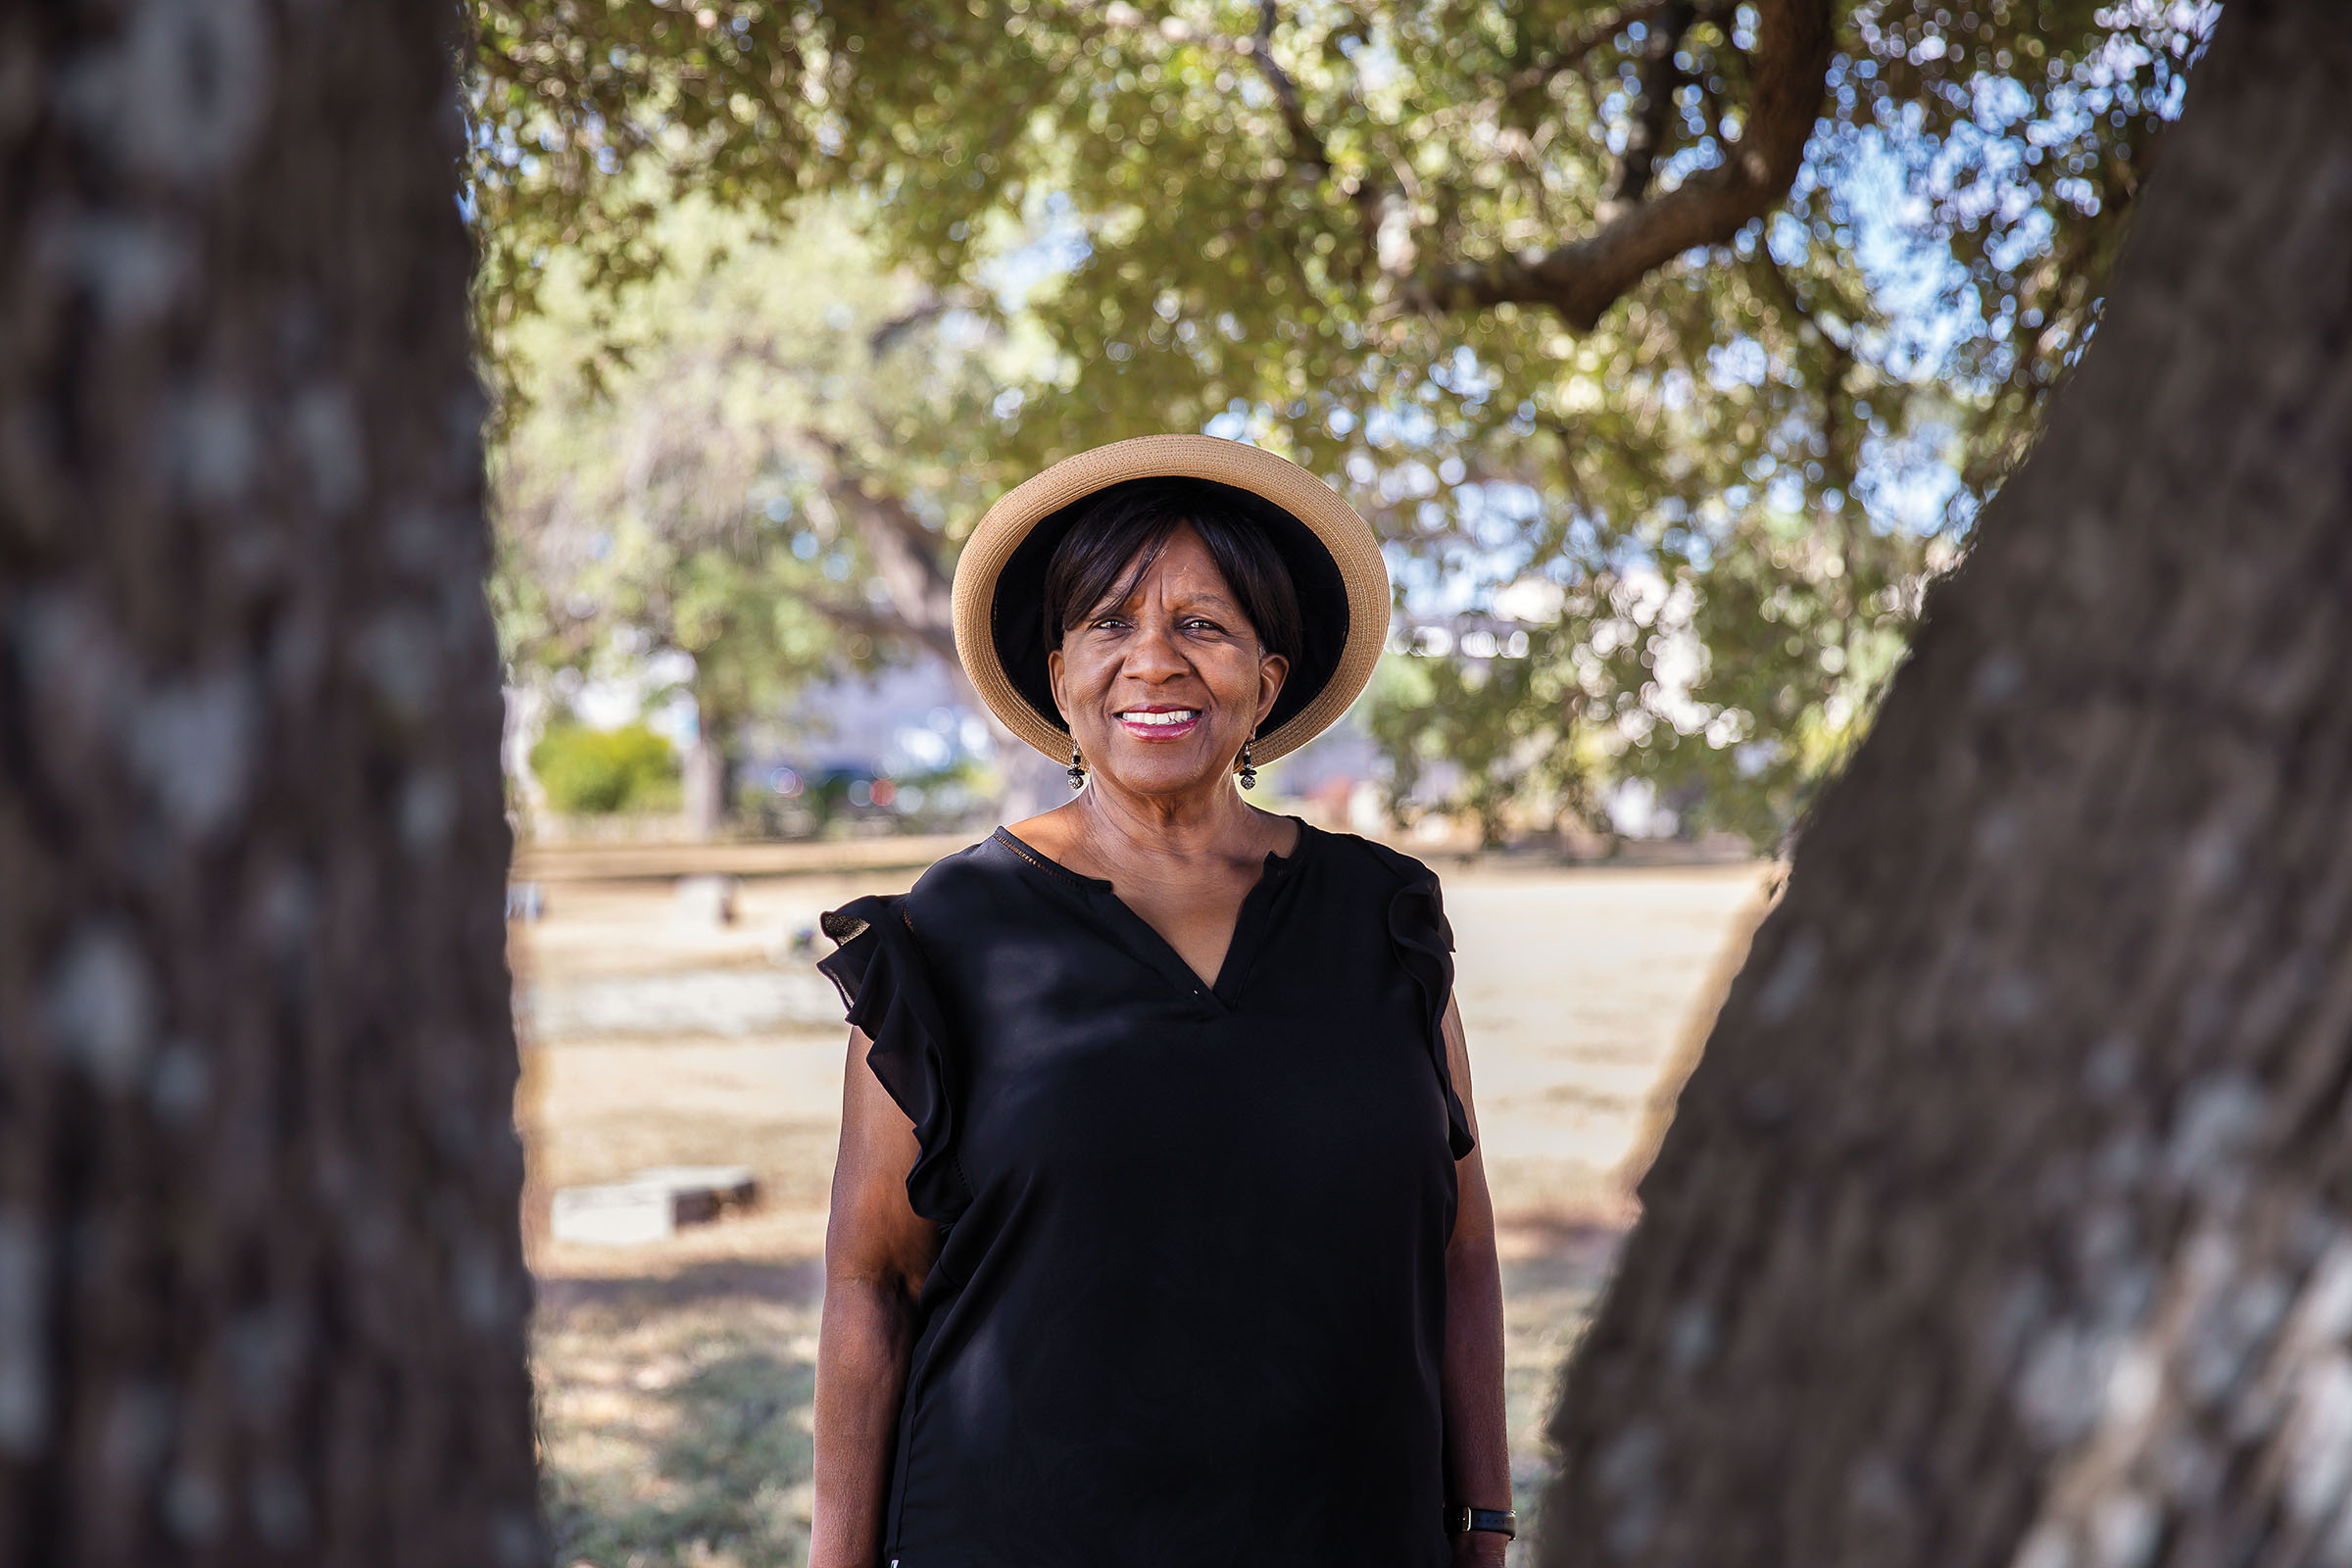 A woman in a black shirt and straw hat stands in front of two green trees in a cemetery